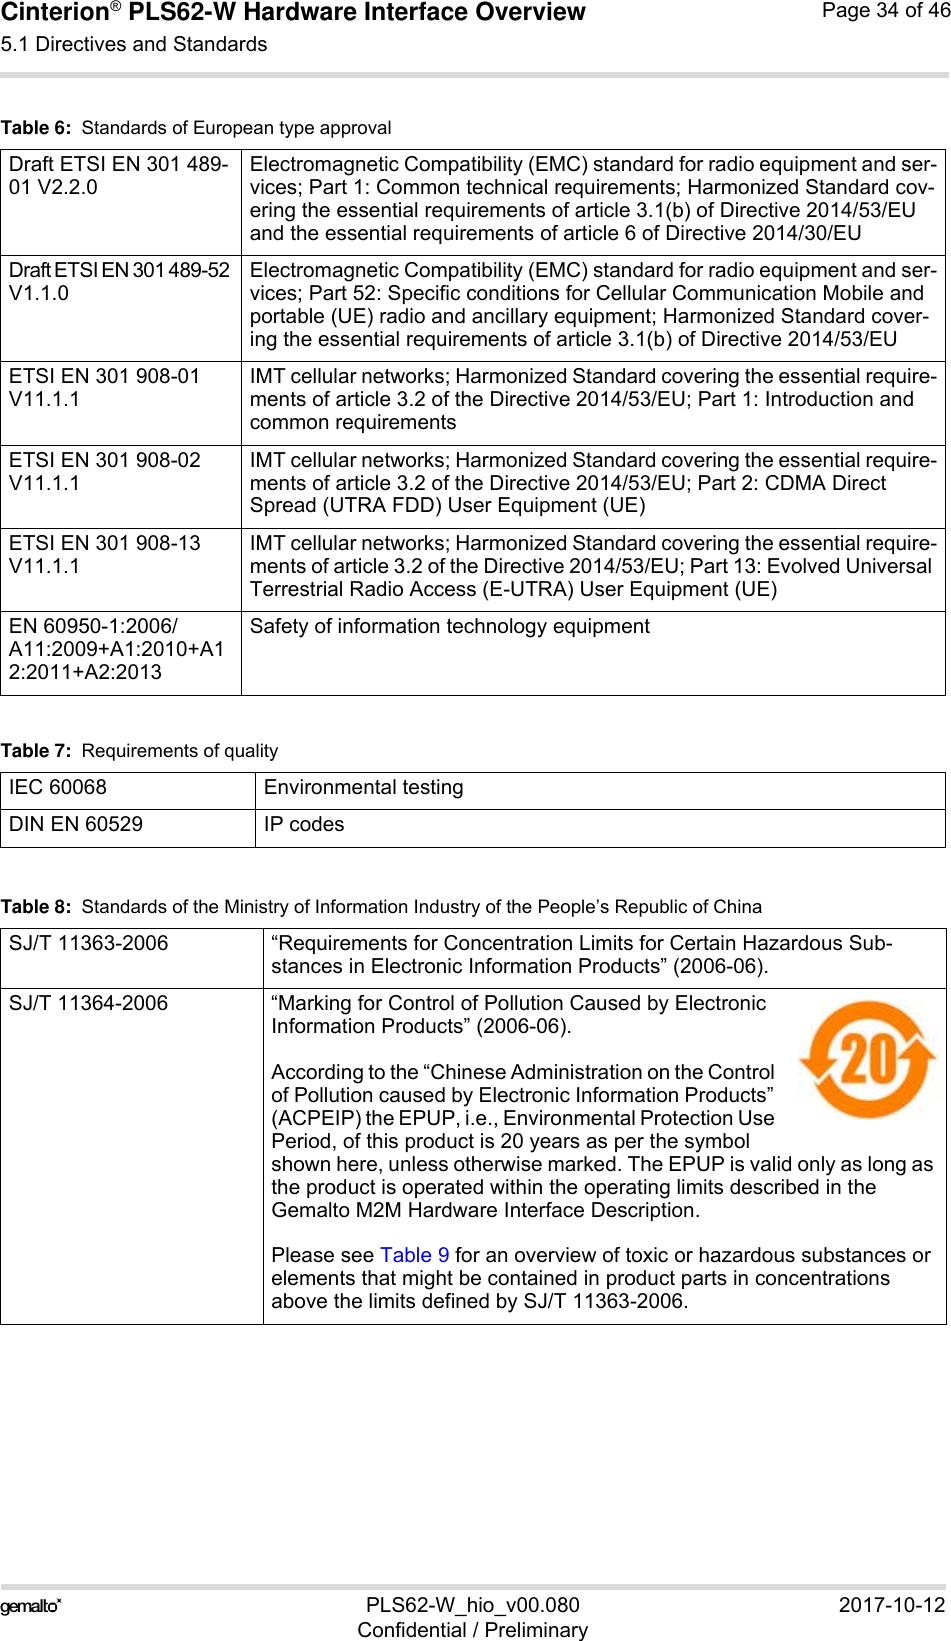 Cinterion® PLS62-W Hardware Interface Overview5.1 Directives and Standards39PLS62-W_hio_v00.080 2017-10-12Confidential / PreliminaryPage 34 of 46Draft ETSI EN 301 489-01 V2.2.0Electromagnetic Compatibility (EMC) standard for radio equipment and ser-vices; Part 1: Common technical requirements; Harmonized Standard cov-ering the essential requirements of article 3.1(b) of Directive 2014/53/EU and the essential requirements of article 6 of Directive 2014/30/EUDraft ETSI EN 301 489-52 V1.1.0Electromagnetic Compatibility (EMC) standard for radio equipment and ser-vices; Part 52: Specific conditions for Cellular Communication Mobile and portable (UE) radio and ancillary equipment; Harmonized Standard cover-ing the essential requirements of article 3.1(b) of Directive 2014/53/EUETSI EN 301 908-01 V11.1.1IMT cellular networks; Harmonized Standard covering the essential require-ments of article 3.2 of the Directive 2014/53/EU; Part 1: Introduction and common requirementsETSI EN 301 908-02 V11.1.1IMT cellular networks; Harmonized Standard covering the essential require-ments of article 3.2 of the Directive 2014/53/EU; Part 2: CDMA Direct Spread (UTRA FDD) User Equipment (UE)ETSI EN 301 908-13 V11.1.1IMT cellular networks; Harmonized Standard covering the essential require-ments of article 3.2 of the Directive 2014/53/EU; Part 13: Evolved Universal Terrestrial Radio Access (E-UTRA) User Equipment (UE)EN 60950-1:2006/ A11:2009+A1:2010+A12:2011+A2:2013Safety of information technology equipmentTable 7:  Requirements of qualityIEC 60068 Environmental testingDIN EN 60529 IP codesTable 8:  Standards of the Ministry of Information Industry of the People’s Republic of ChinaSJ/T 11363-2006  “Requirements for Concentration Limits for Certain Hazardous Sub-stances in Electronic Information Products” (2006-06).SJ/T 11364-2006 “Marking for Control of Pollution Caused by Electronic Information Products” (2006-06).According to the “Chinese Administration on the Control of Pollution caused by Electronic Information Products” (ACPEIP) the EPUP, i.e., Environmental Protection Use Period, of this product is 20 years as per the symbol shown here, unless otherwise marked. The EPUP is valid only as long as the product is operated within the operating limits described in the Gemalto M2M Hardware Interface Description.Please see Table 9 for an overview of toxic or hazardous substances or elements that might be contained in product parts in concentrations above the limits defined by SJ/T 11363-2006. Table 6:  Standards of European type approval